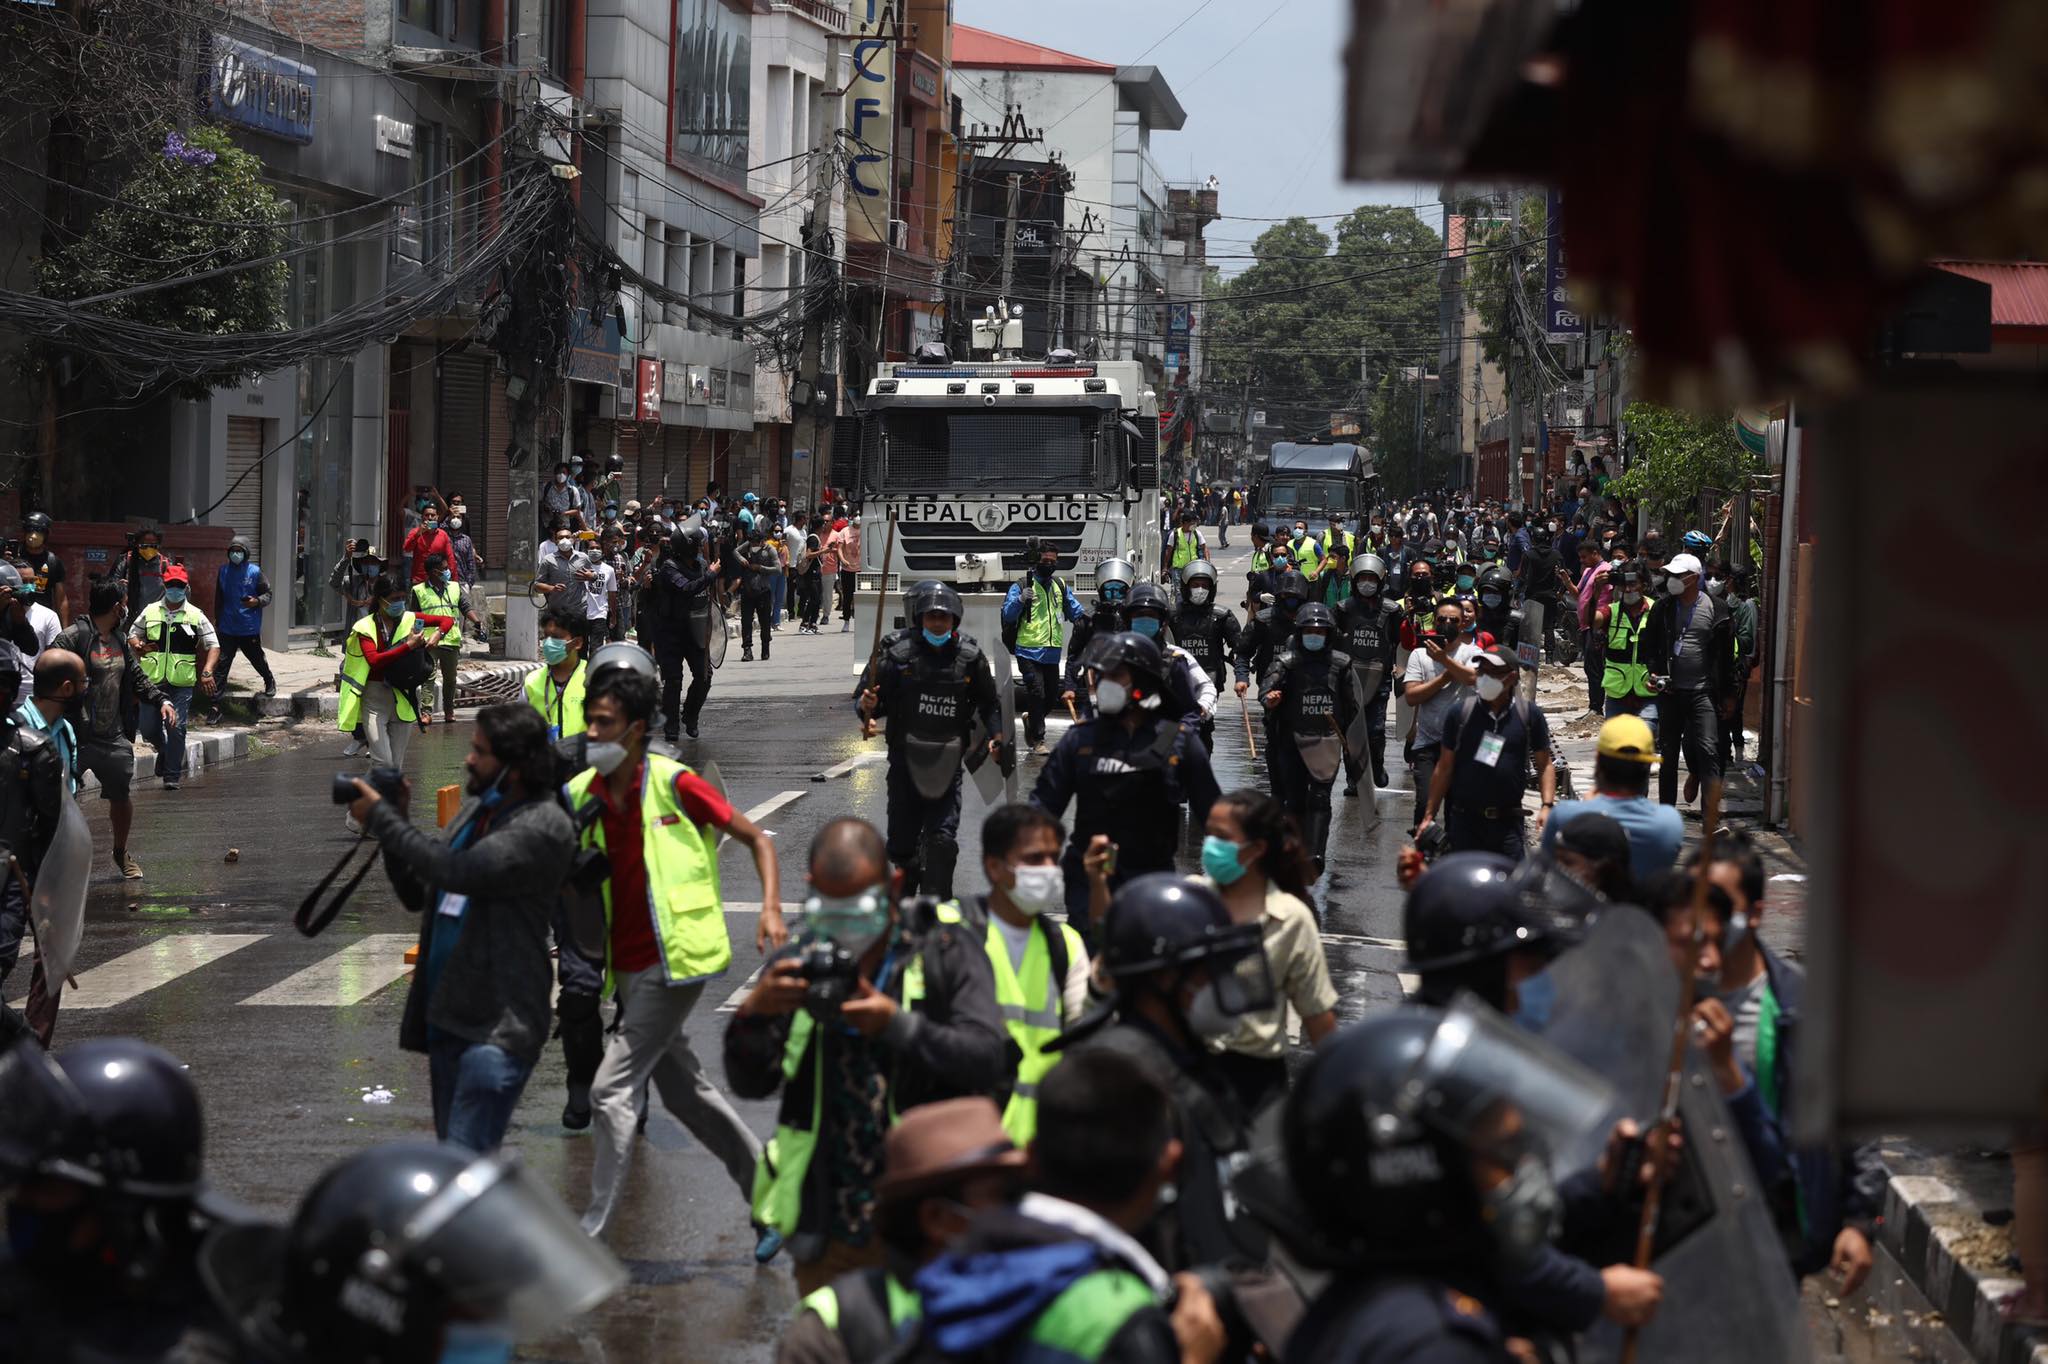 Police use teargas, water cannons to disperse protesters